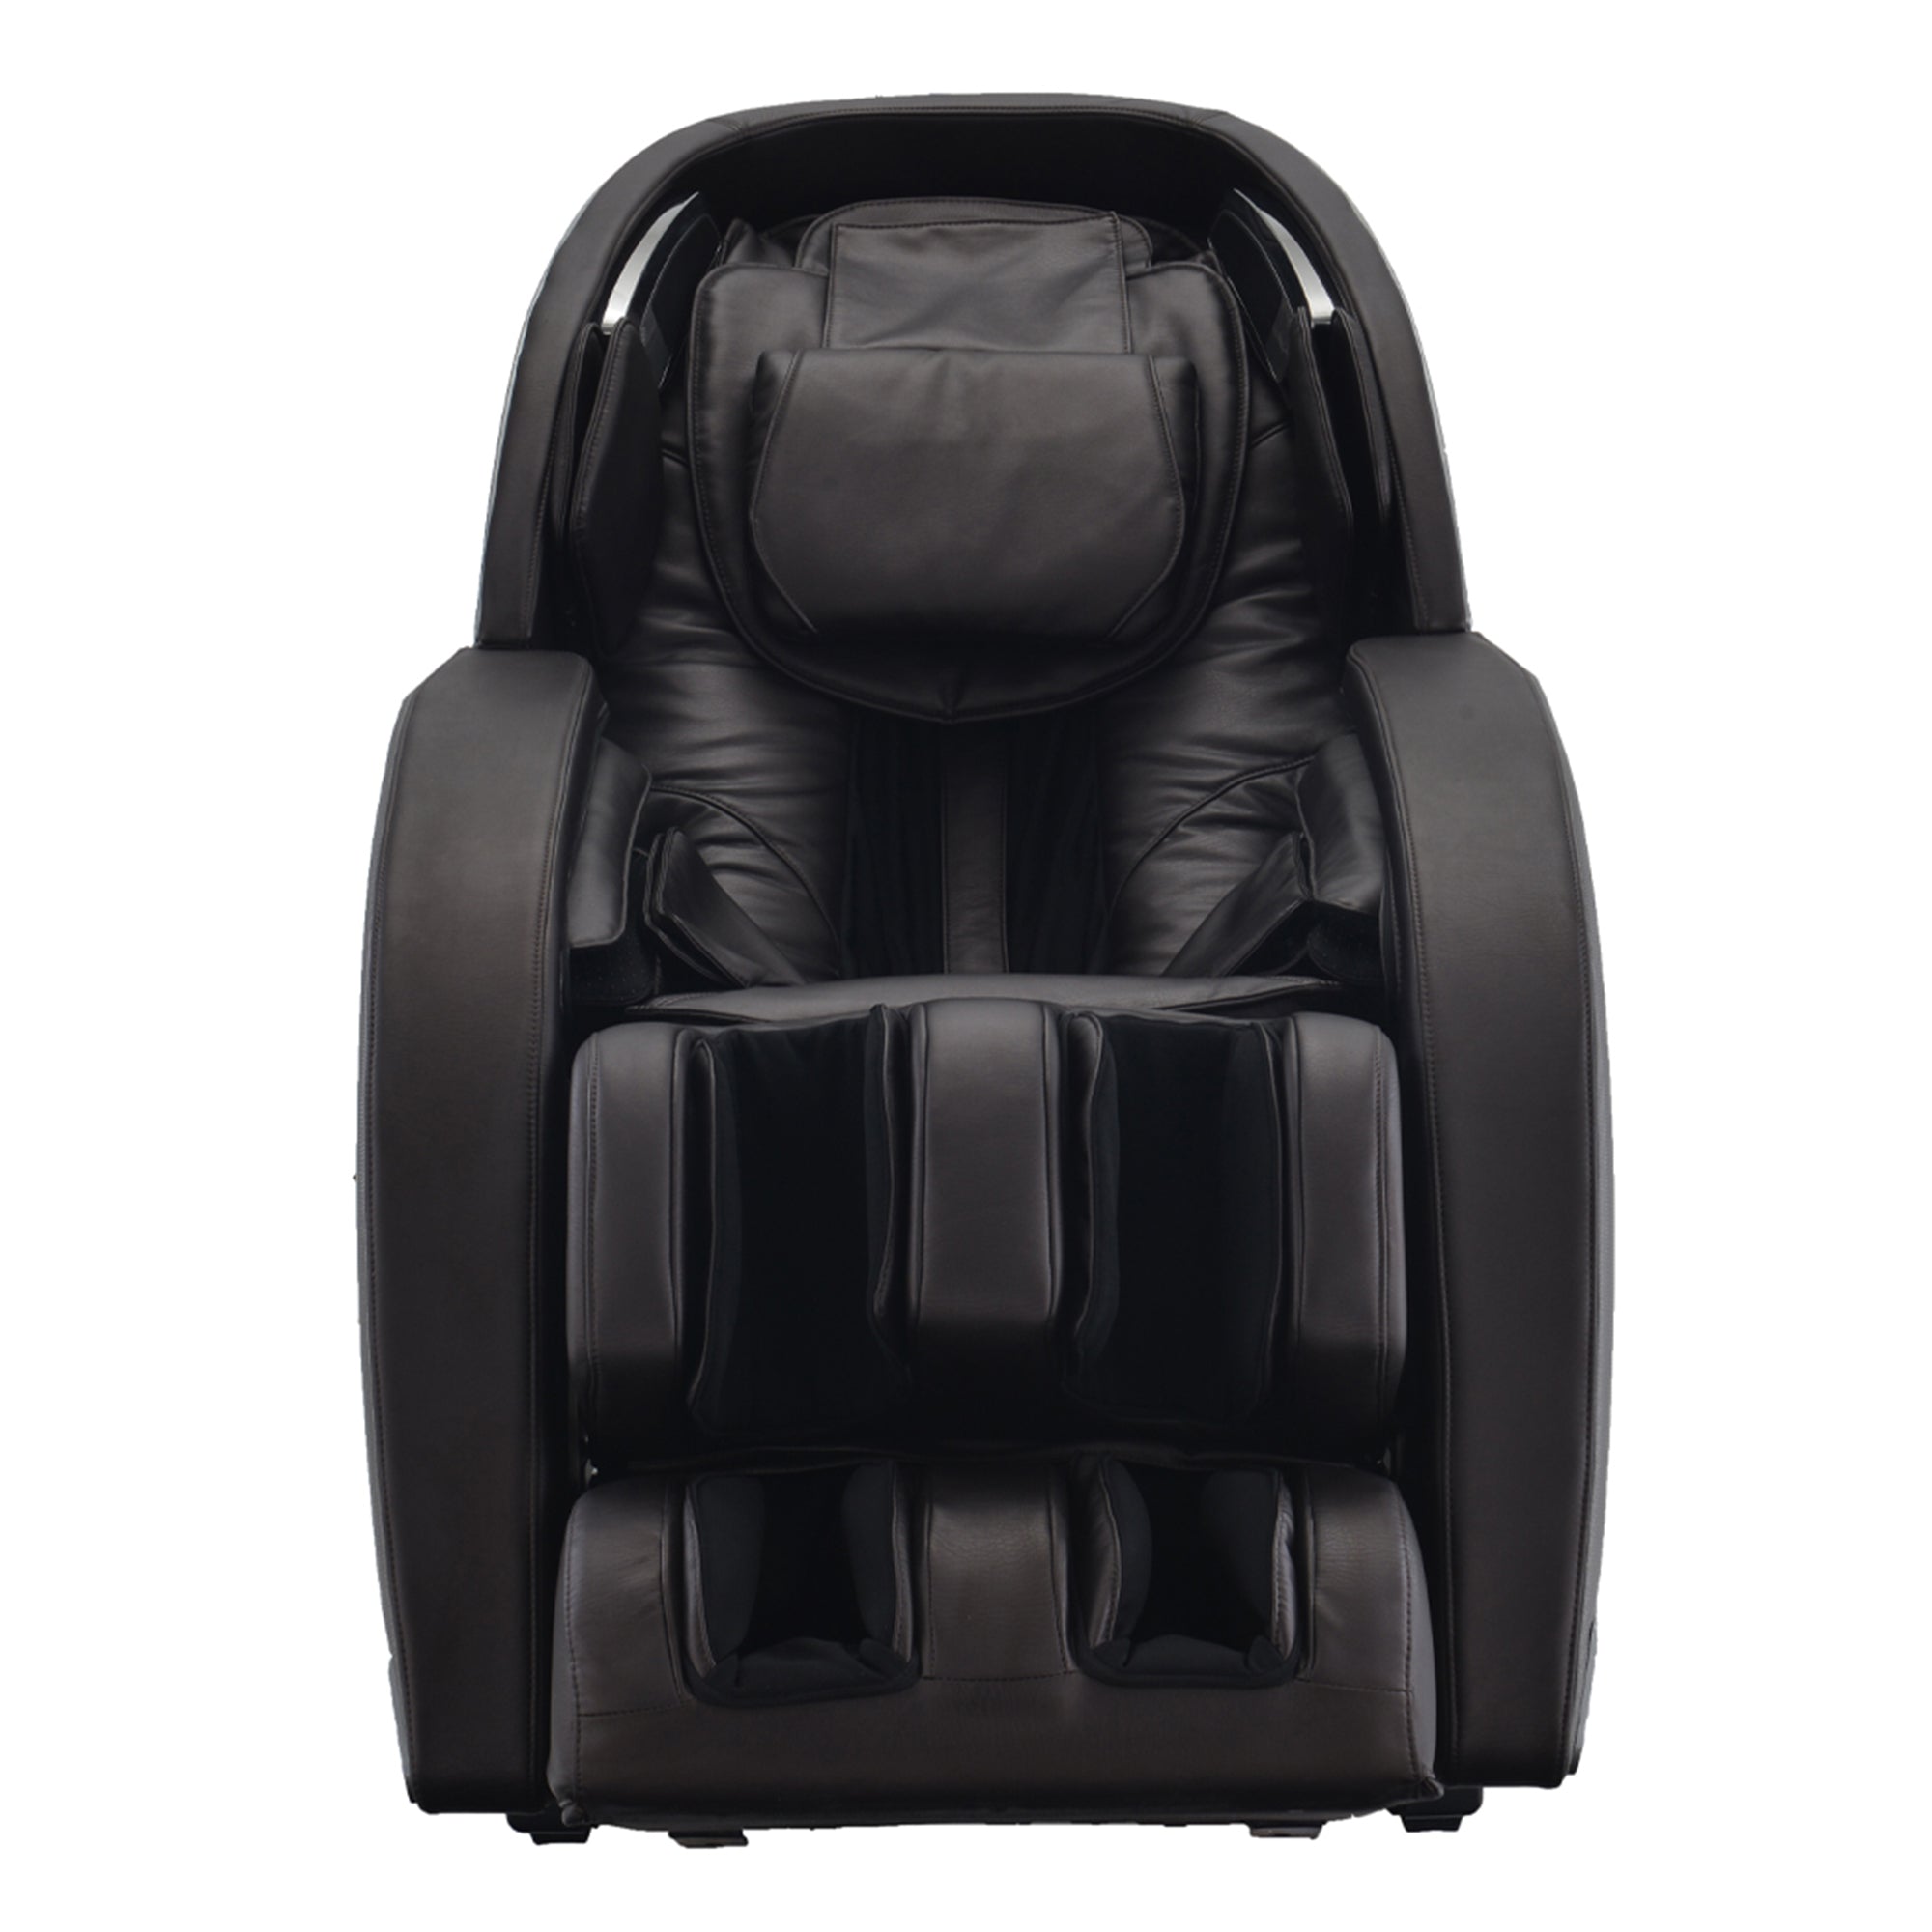 Infinity Evolution Massage Chair Certified Pre-Owned Model | Grade A - Pristine Home & Wellness